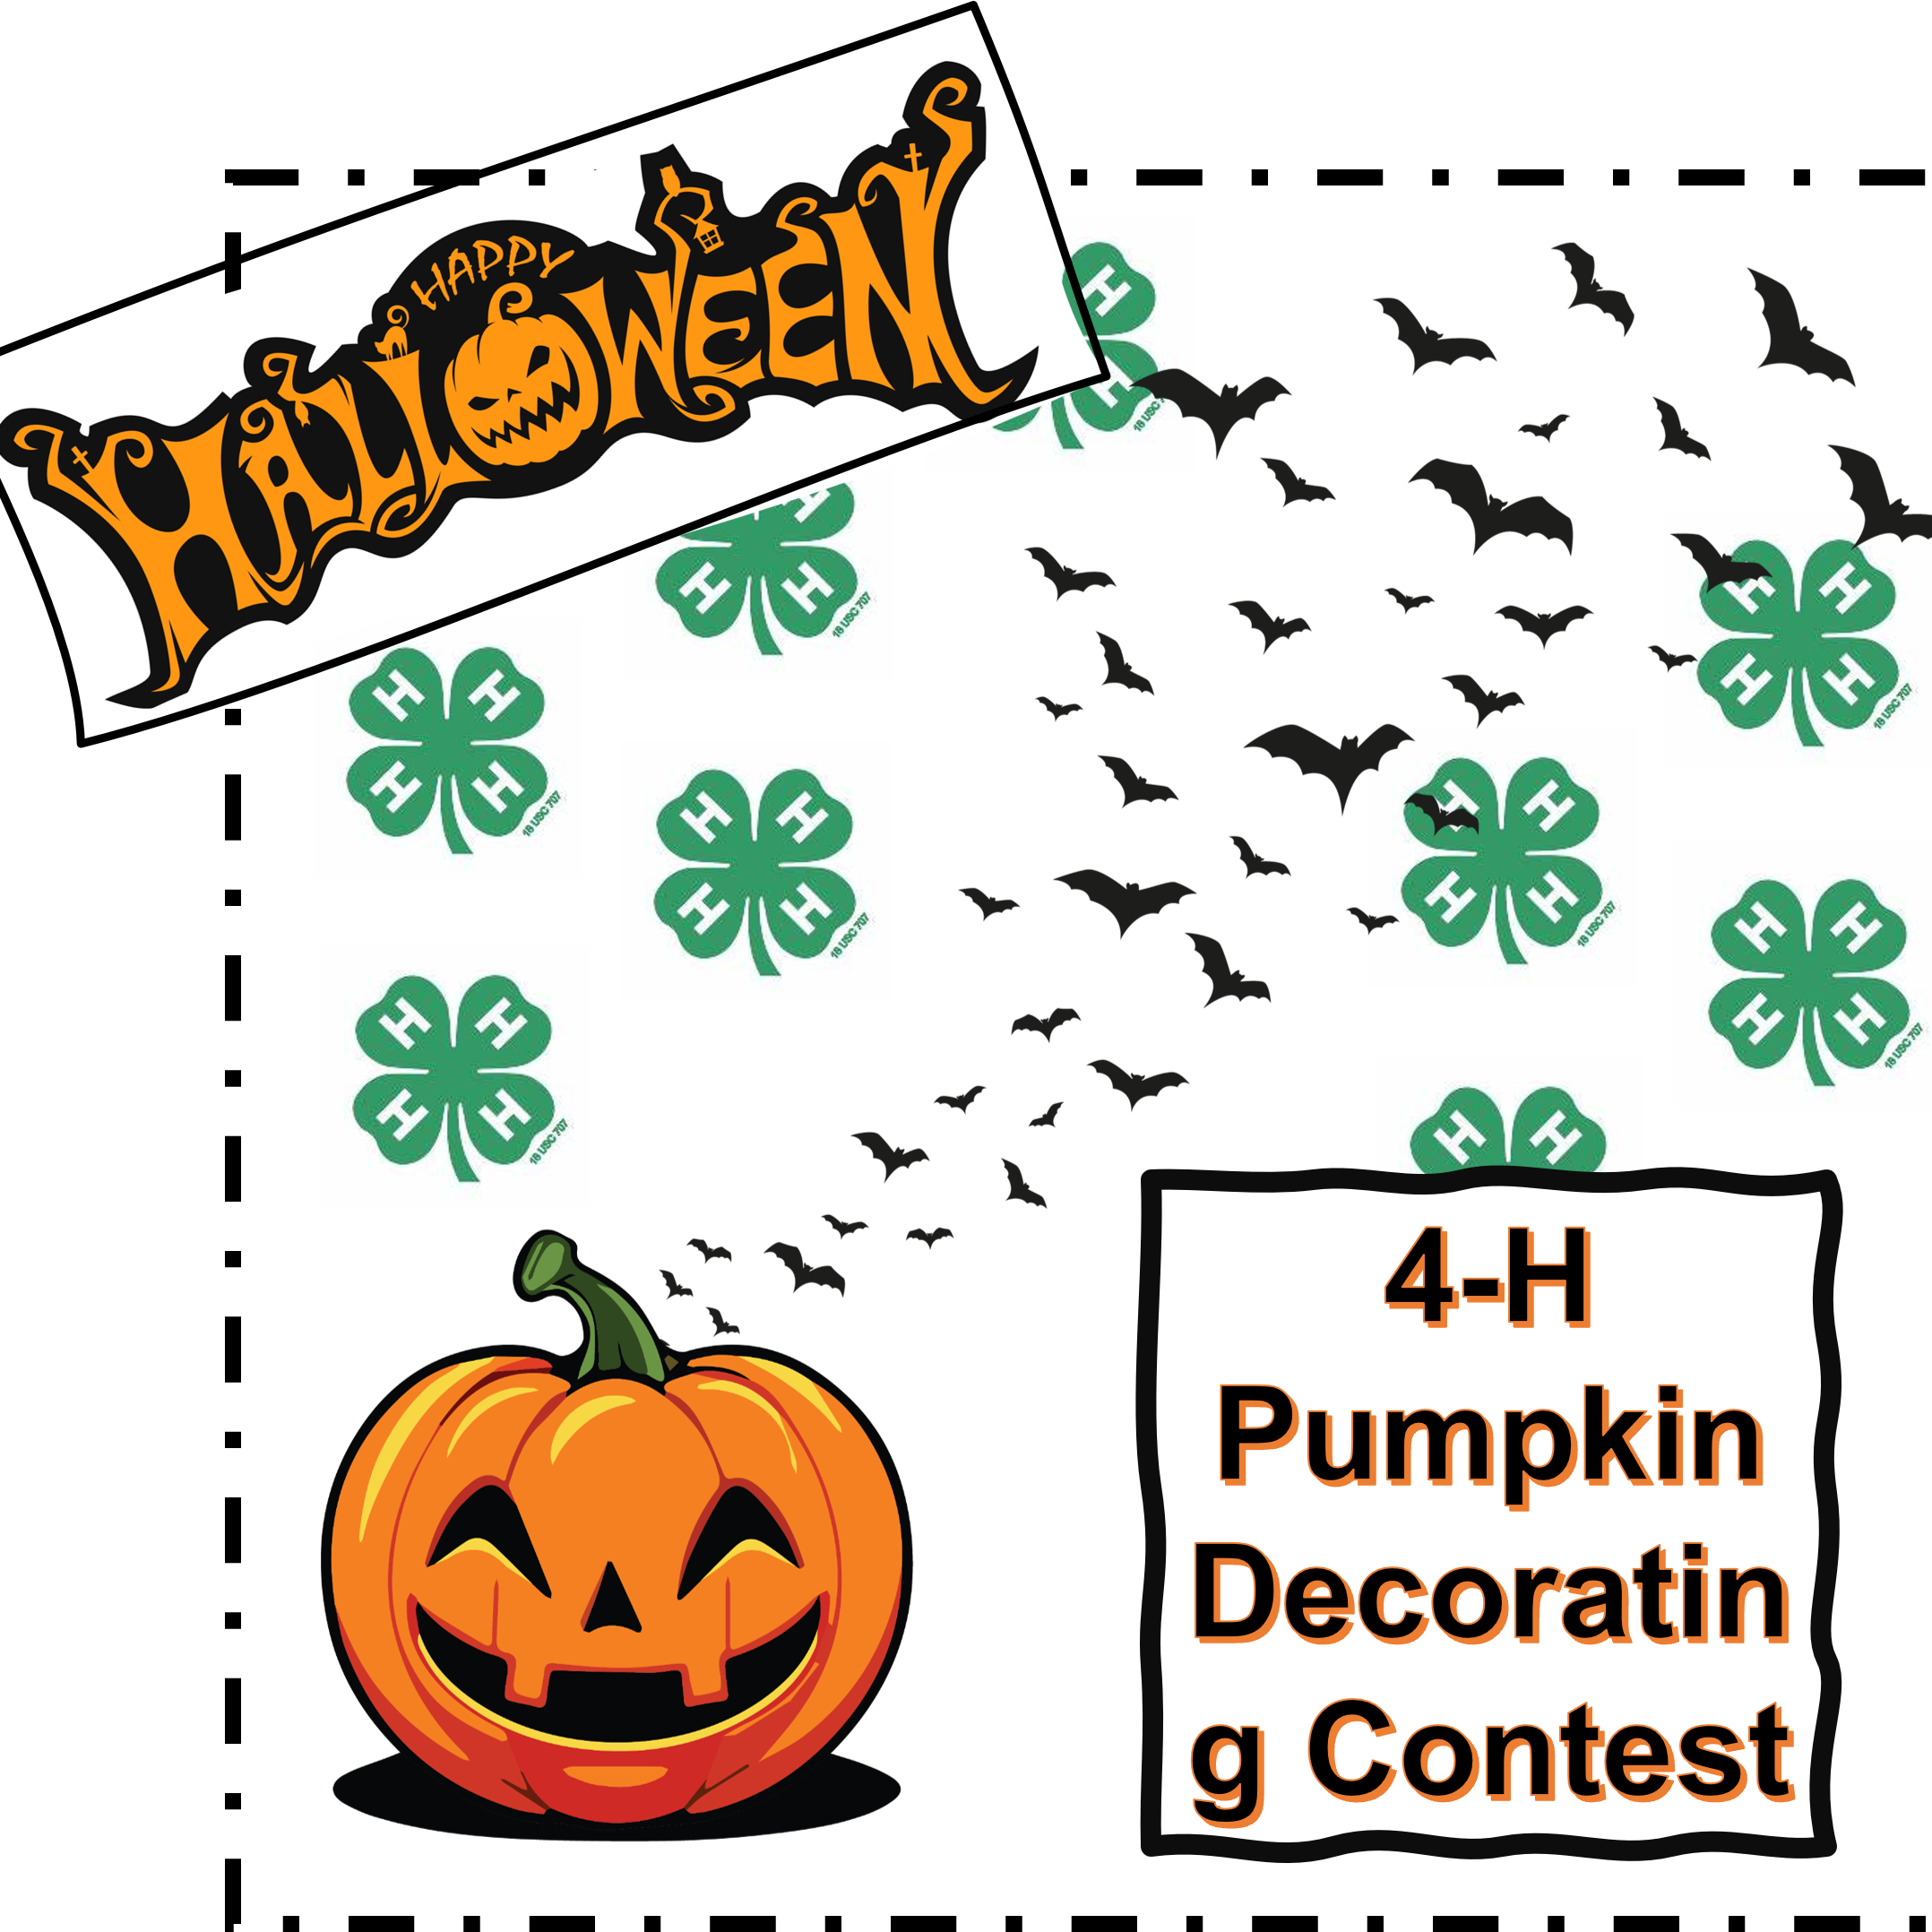 Image that says Happy Halloween, 4-H Pumpkin Decorating Contest 